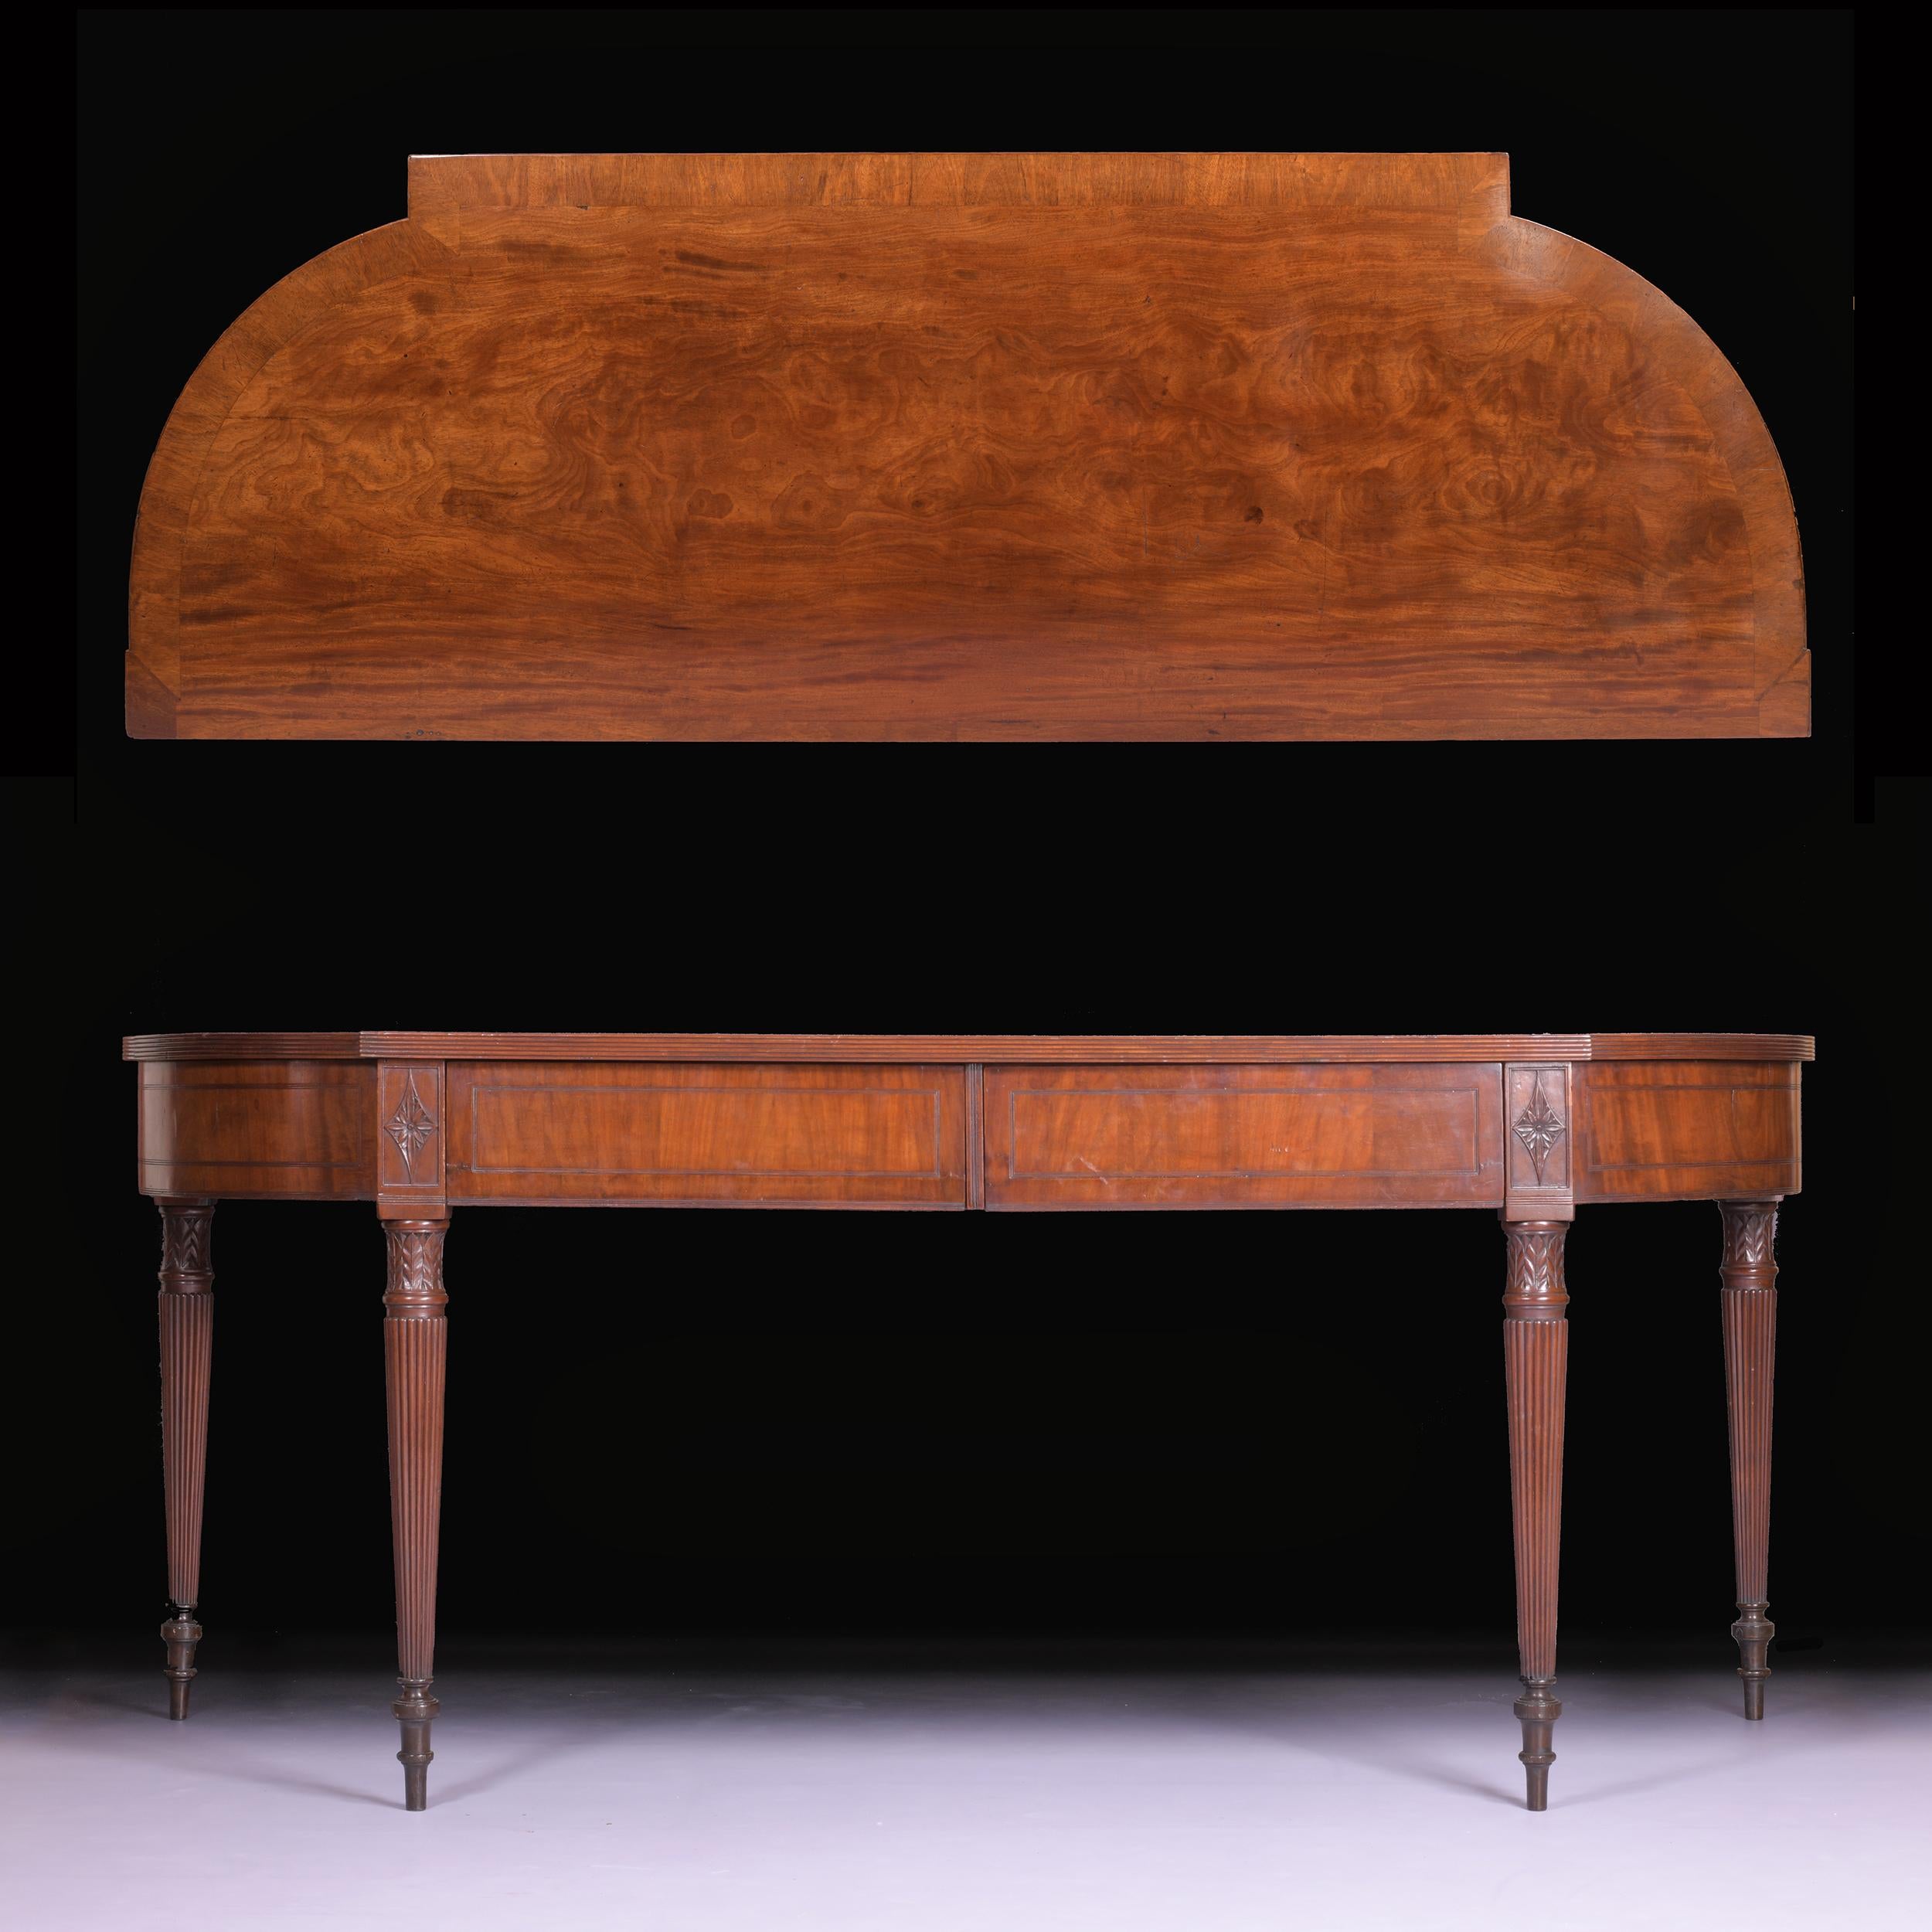 A superb early Regency mahogany breakfront serving table attributed to Gillows of Lancaster, constructed from the finest quality coloured & figured mahogany, the shaped frieze with a pair of central drawers resting on four elegant turned legs with